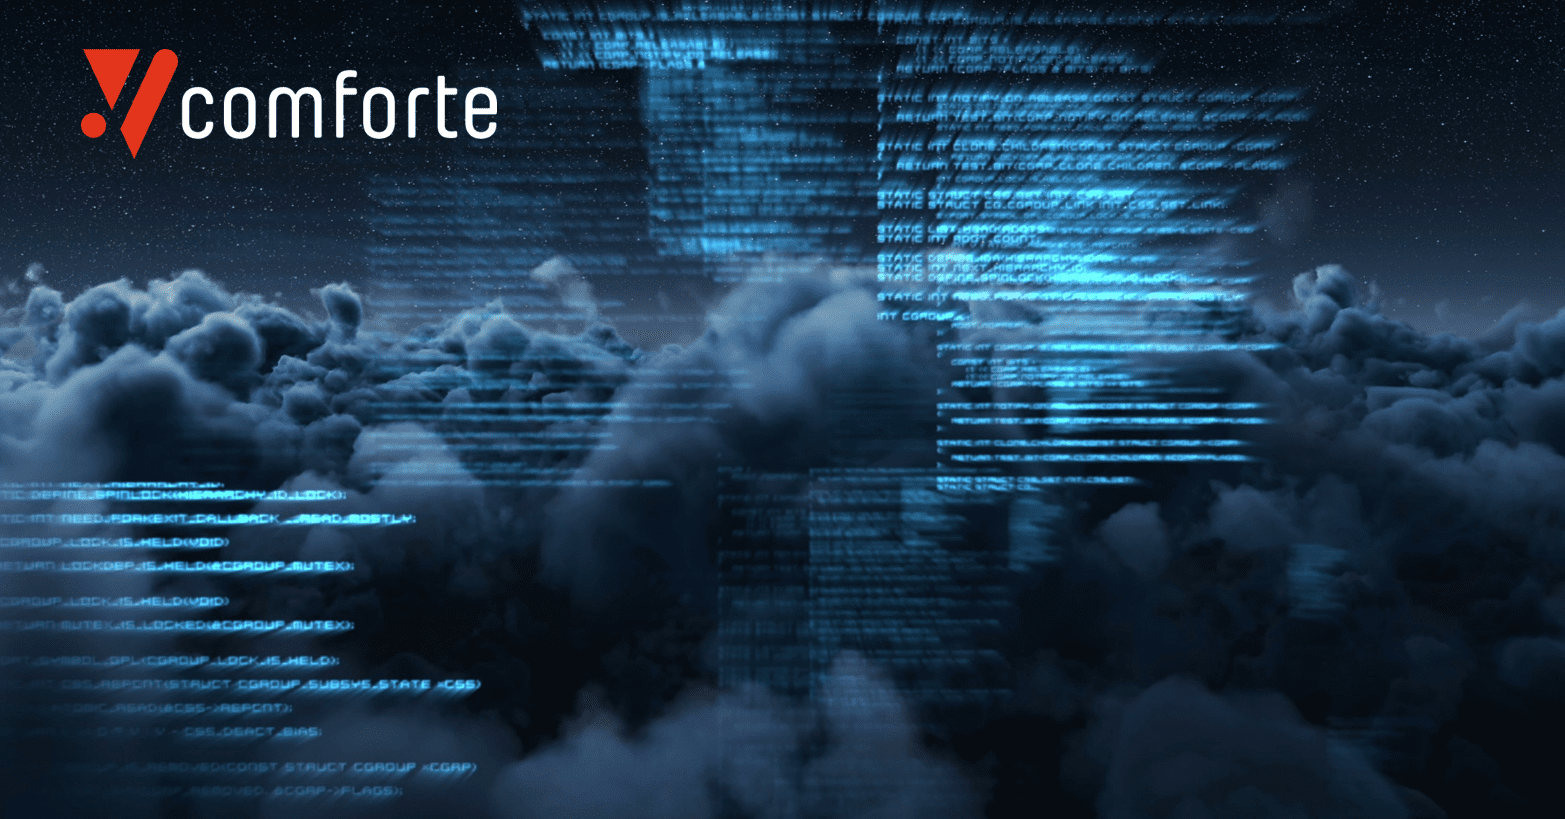 Protecting Your Enterprise Data from a Coming Cyber Storm – Source: securityboulevard.com